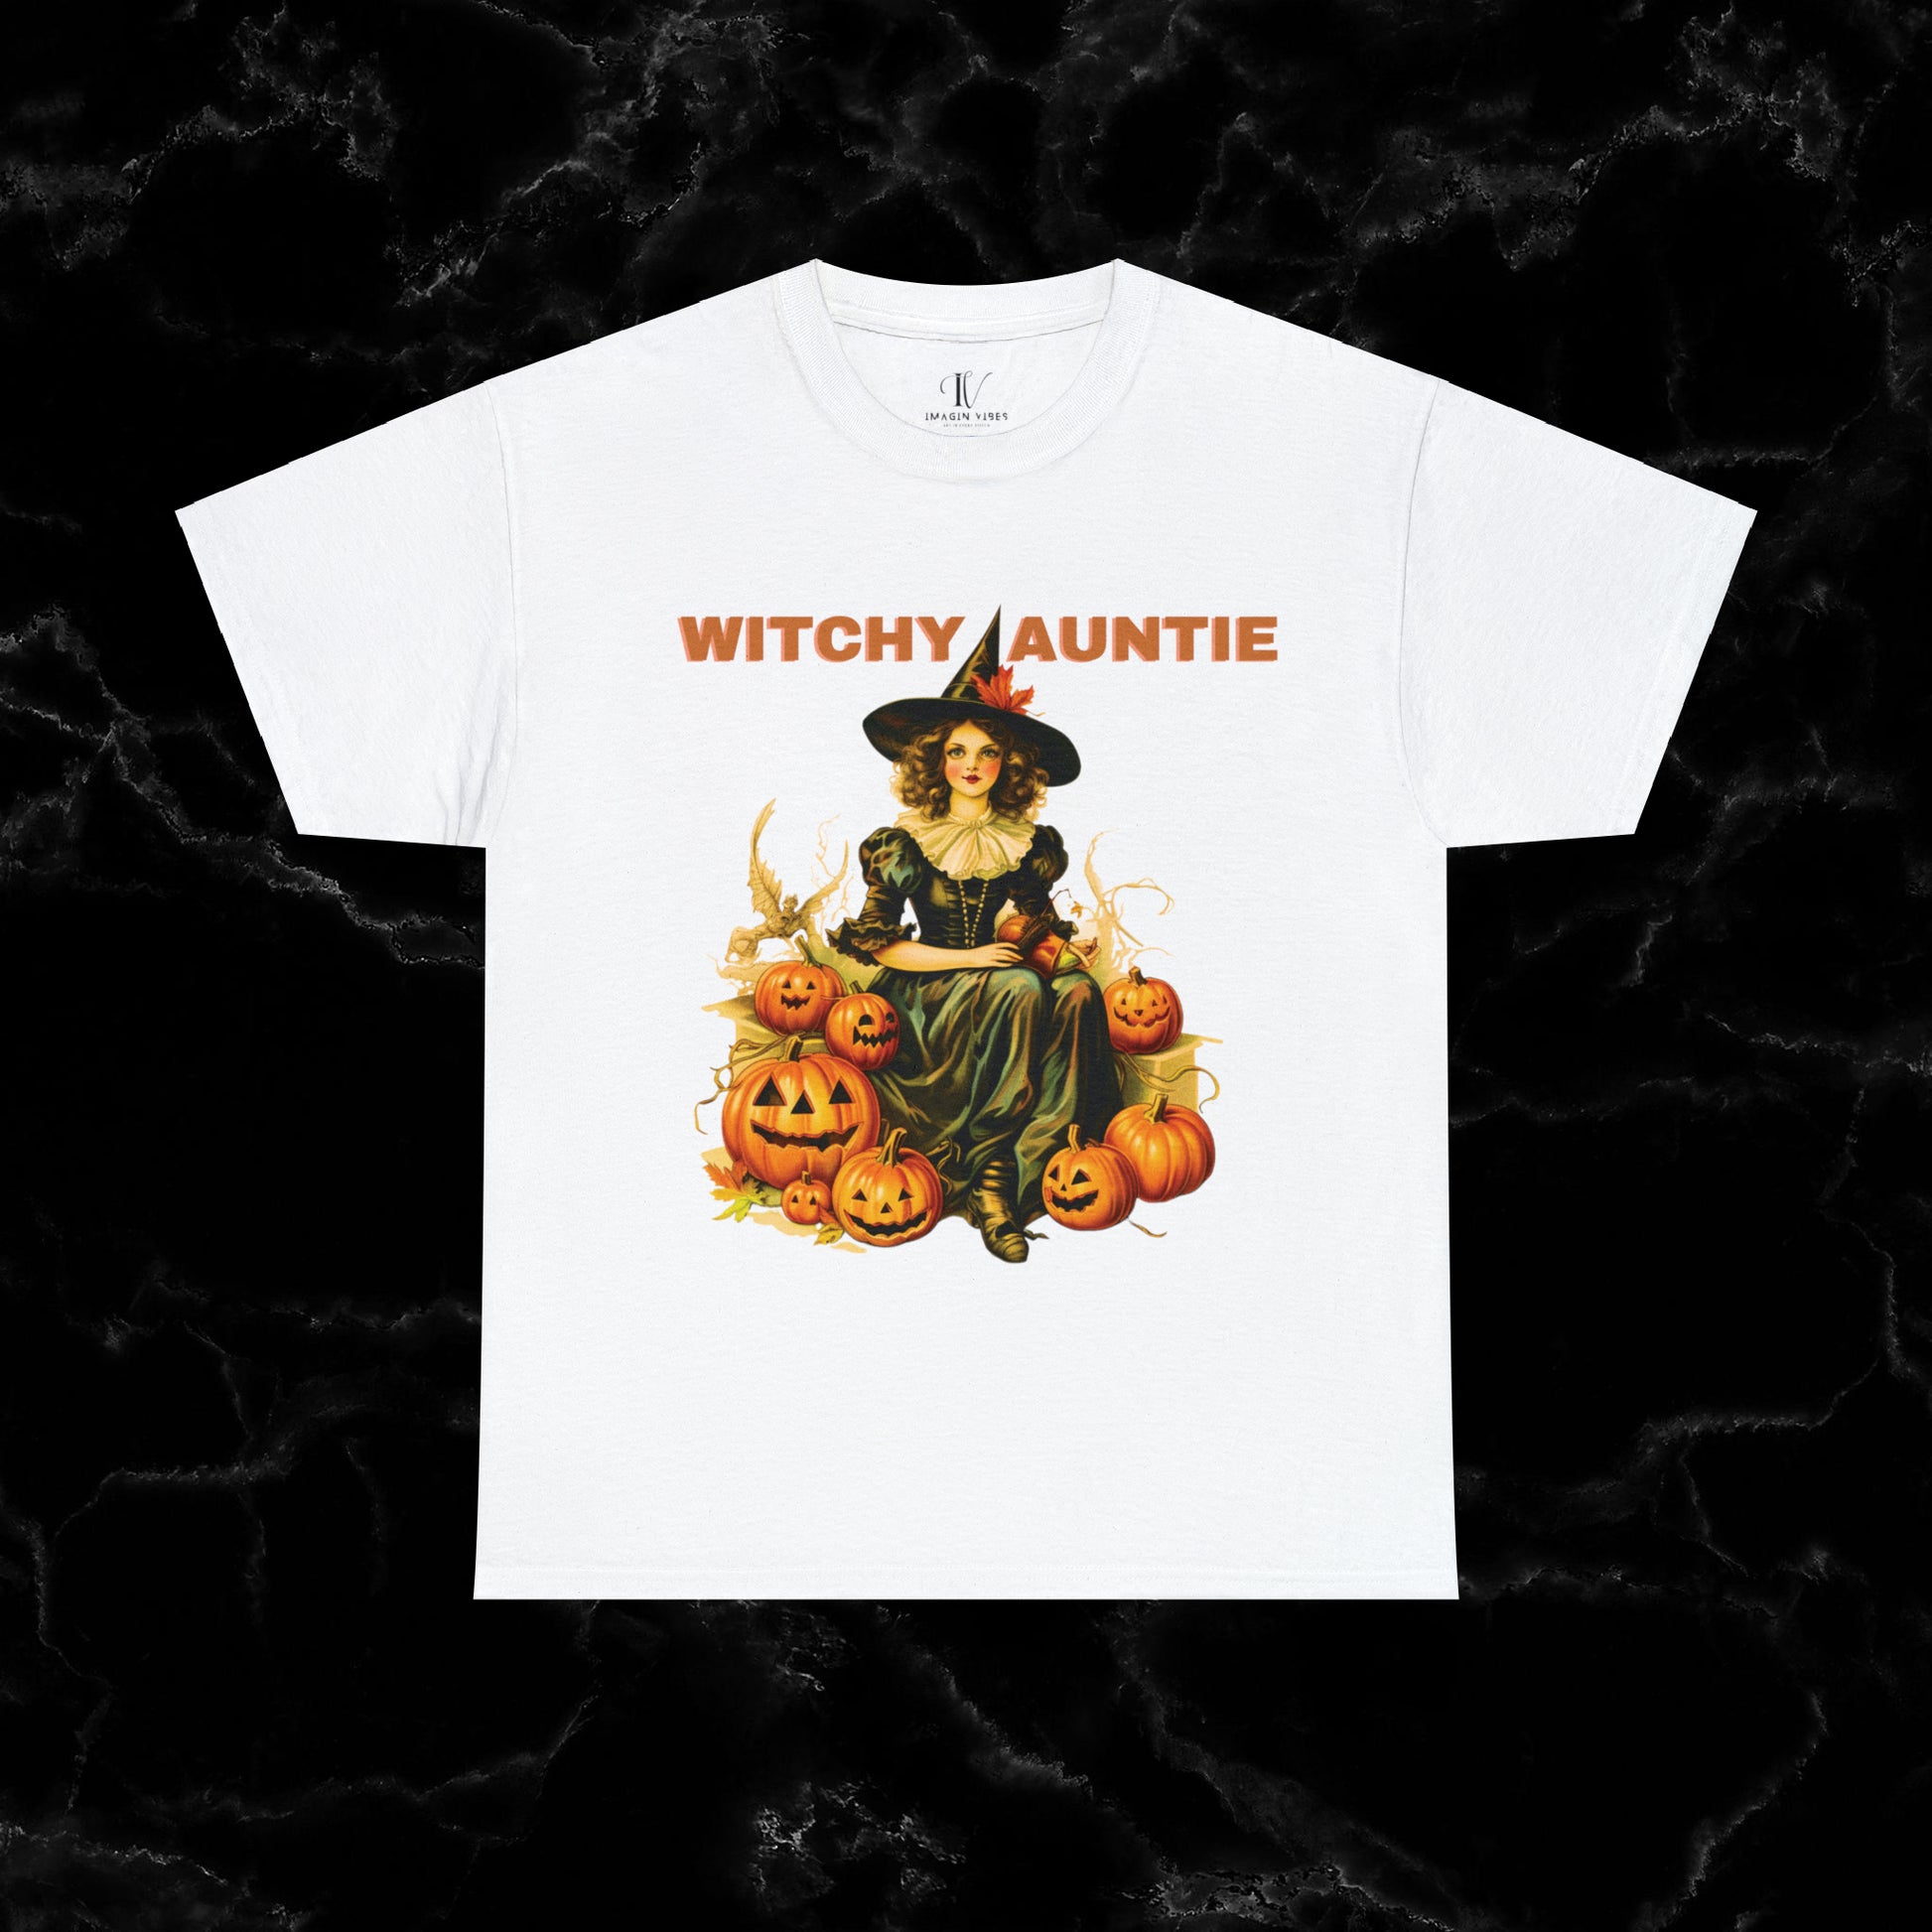 Witchy Auntie Cotton T-Shirt - Cool Aunt, Aunt Halloween, Perfect Gift for Aunts T-Shirt White S 